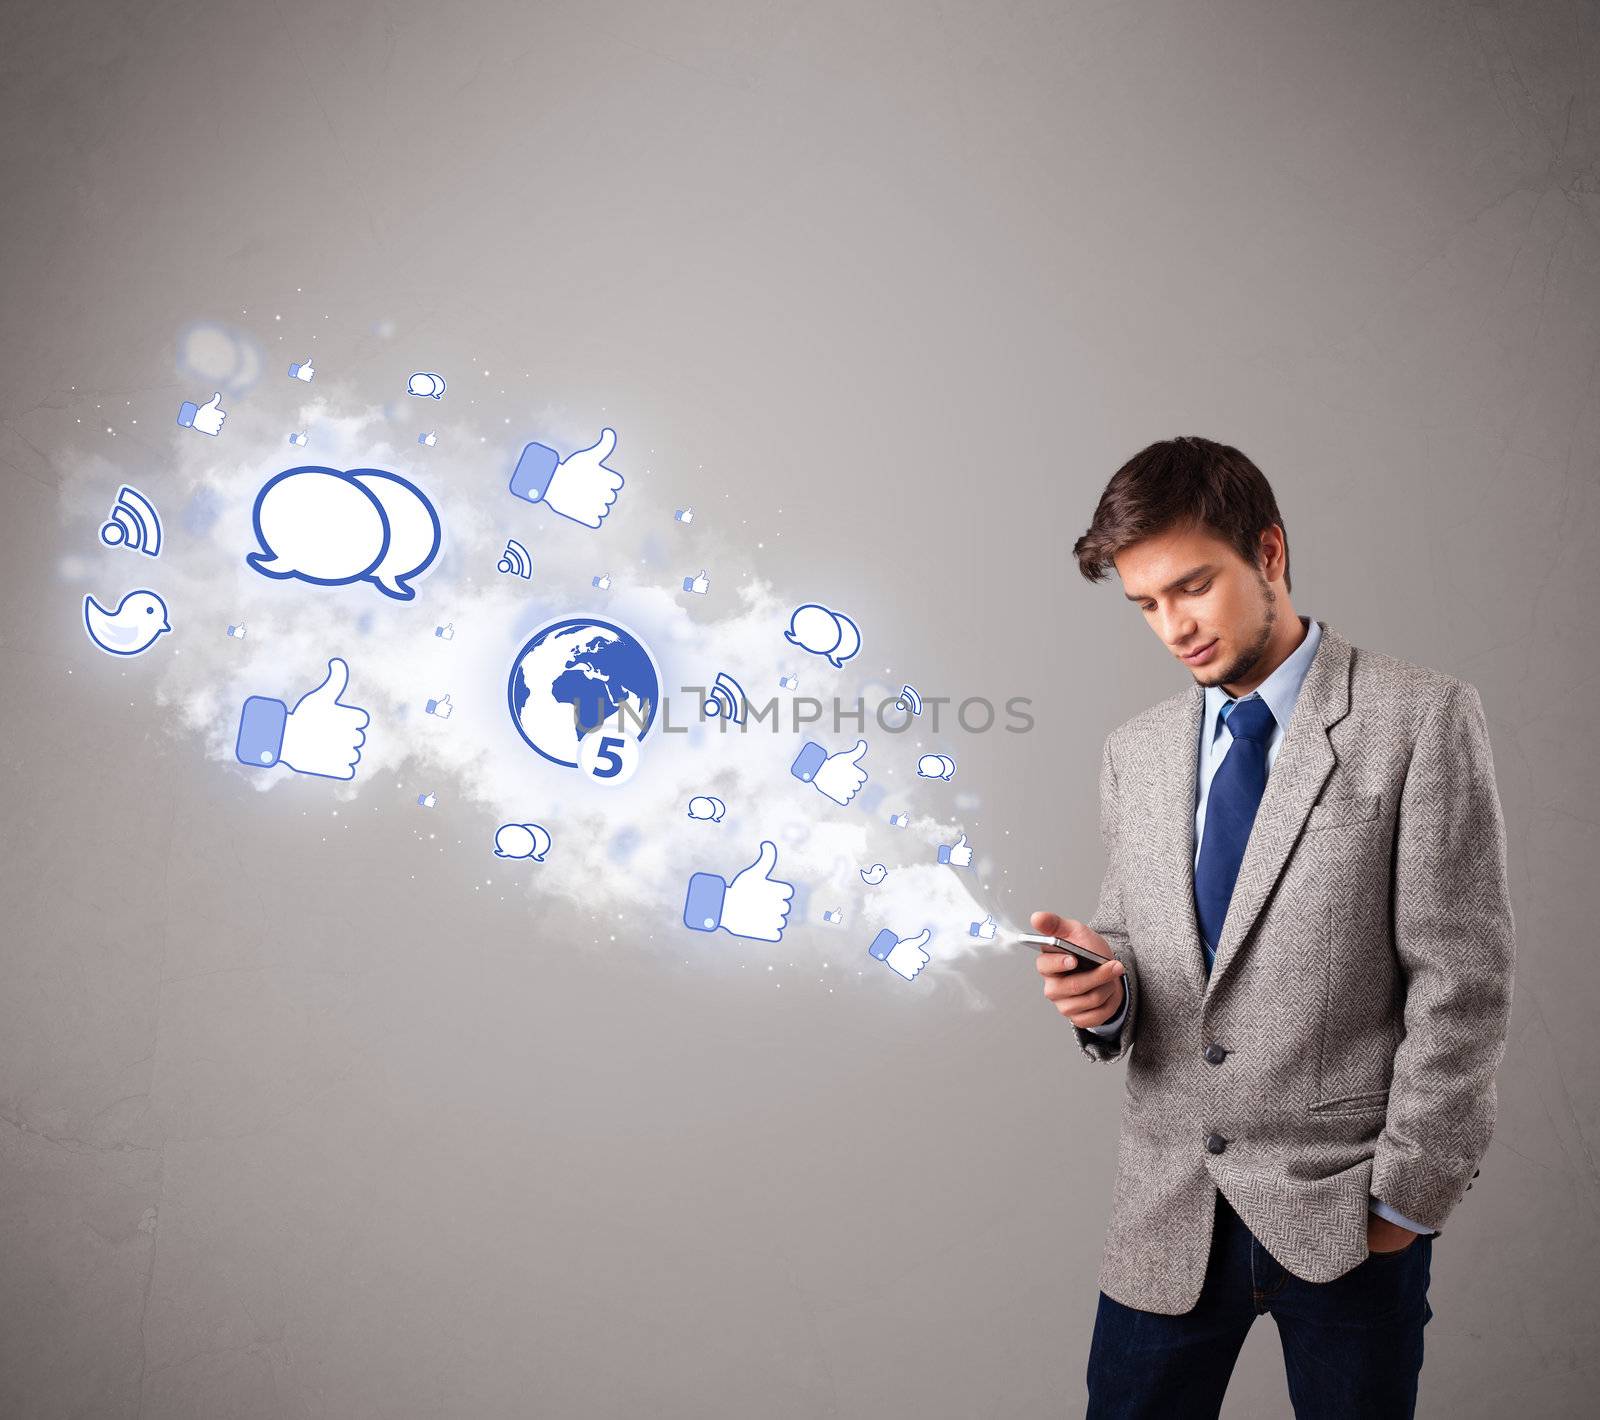 attractive young man holding a phone with social media icons in abstract cloud